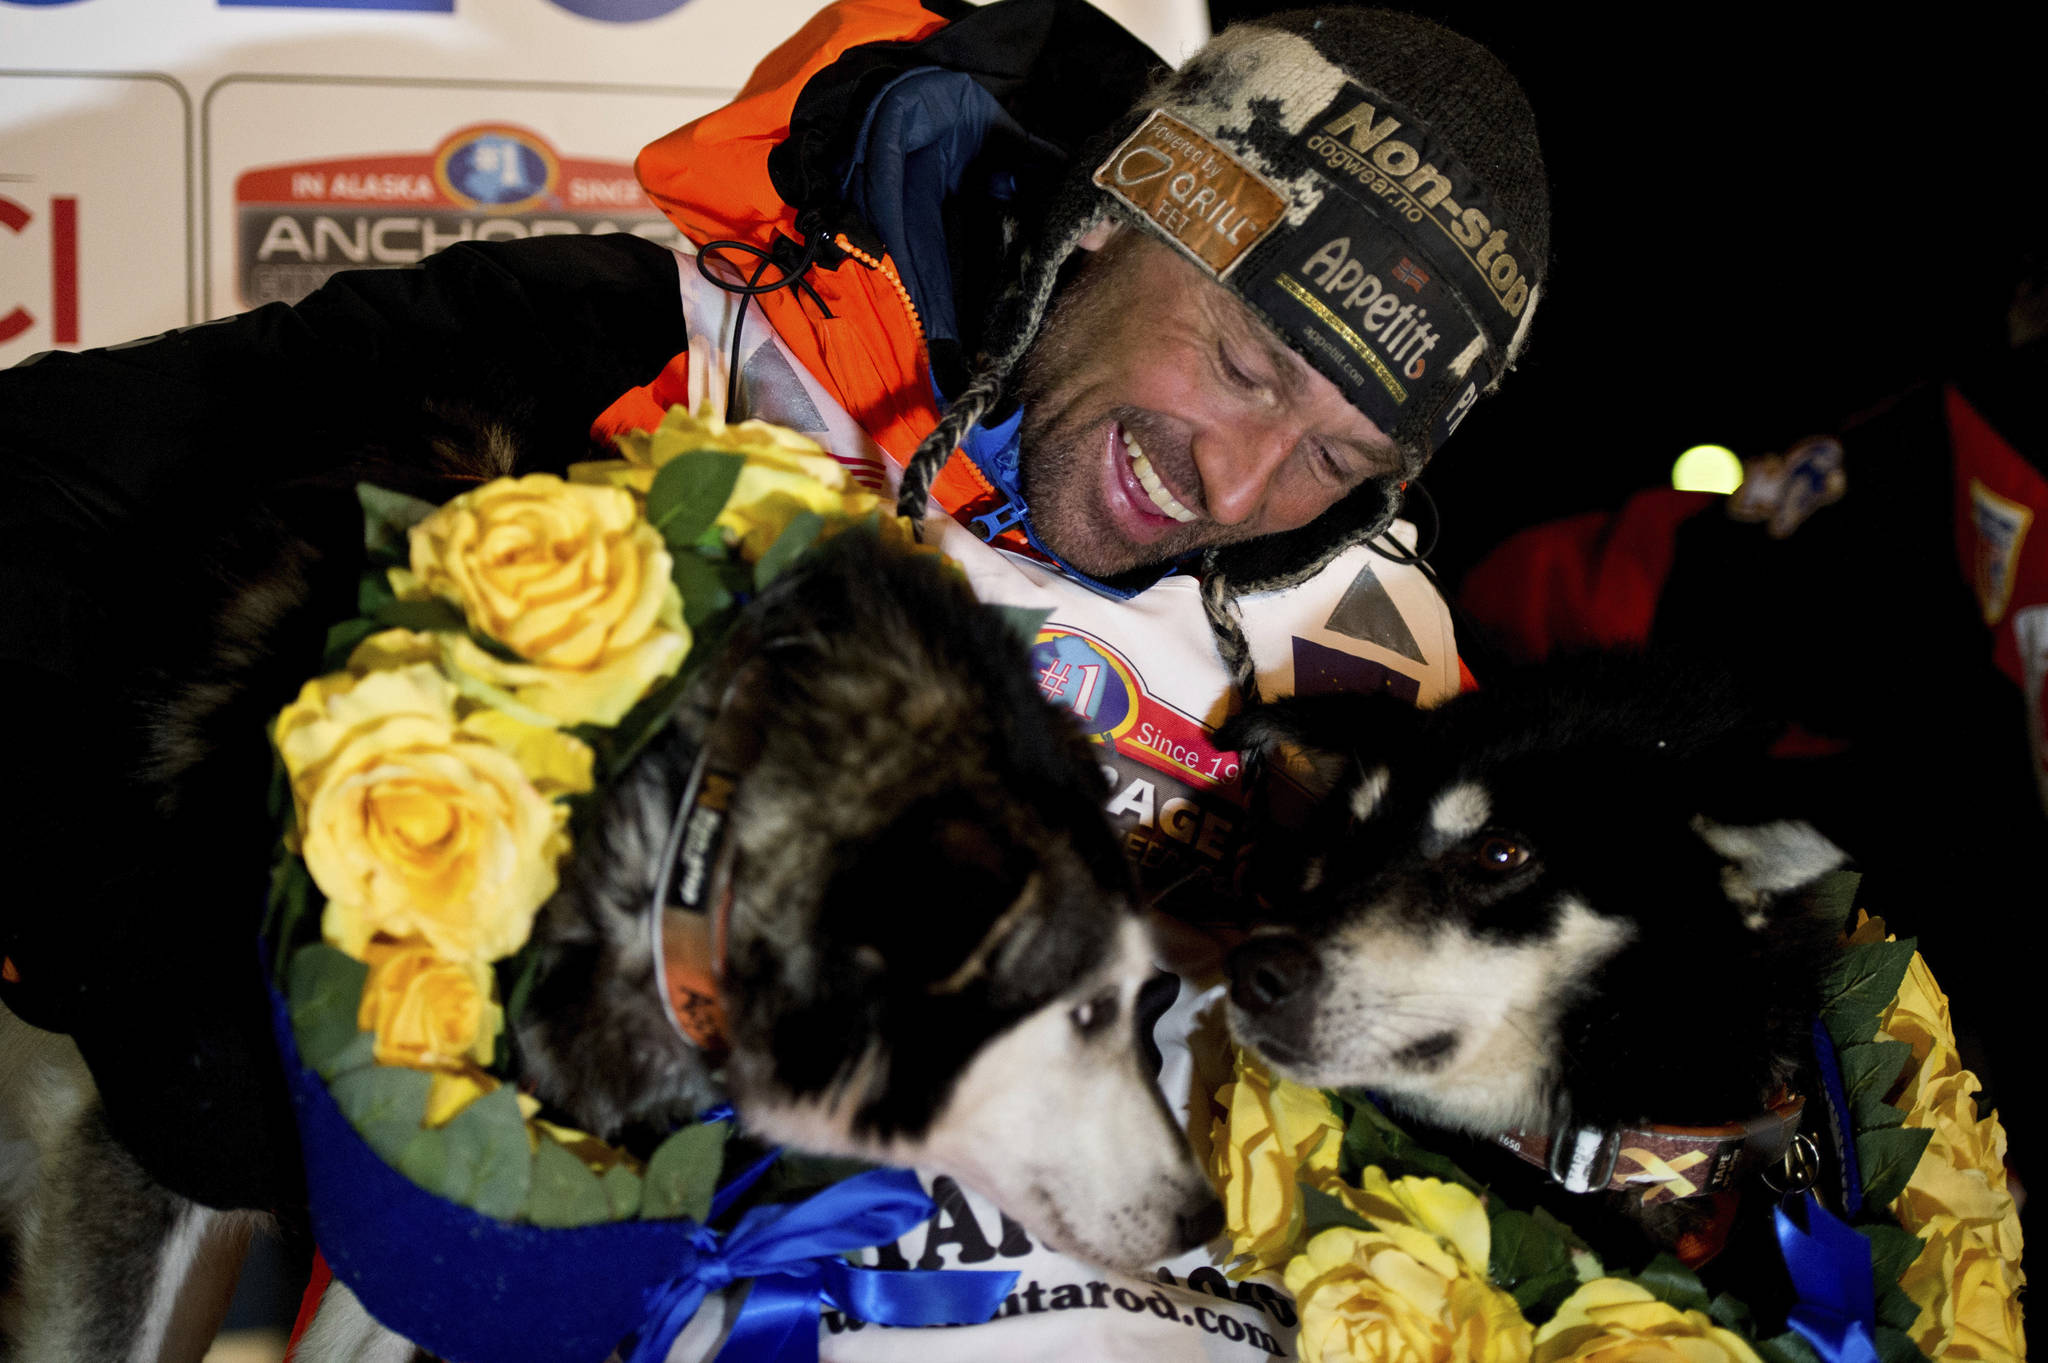 Thomas Waerner, of Norway, celebrates in Nome his win in the Iditarod Trail Sled Dog Race. Waerner is still waiting to return to his home in Norway. Waerner and his 16 dogs have been stranded in Alaska by travel restrictions and flight cancellations caused by the coronavirus pandemic. (Marc Lester | Anchorage Daily News via AP, File)